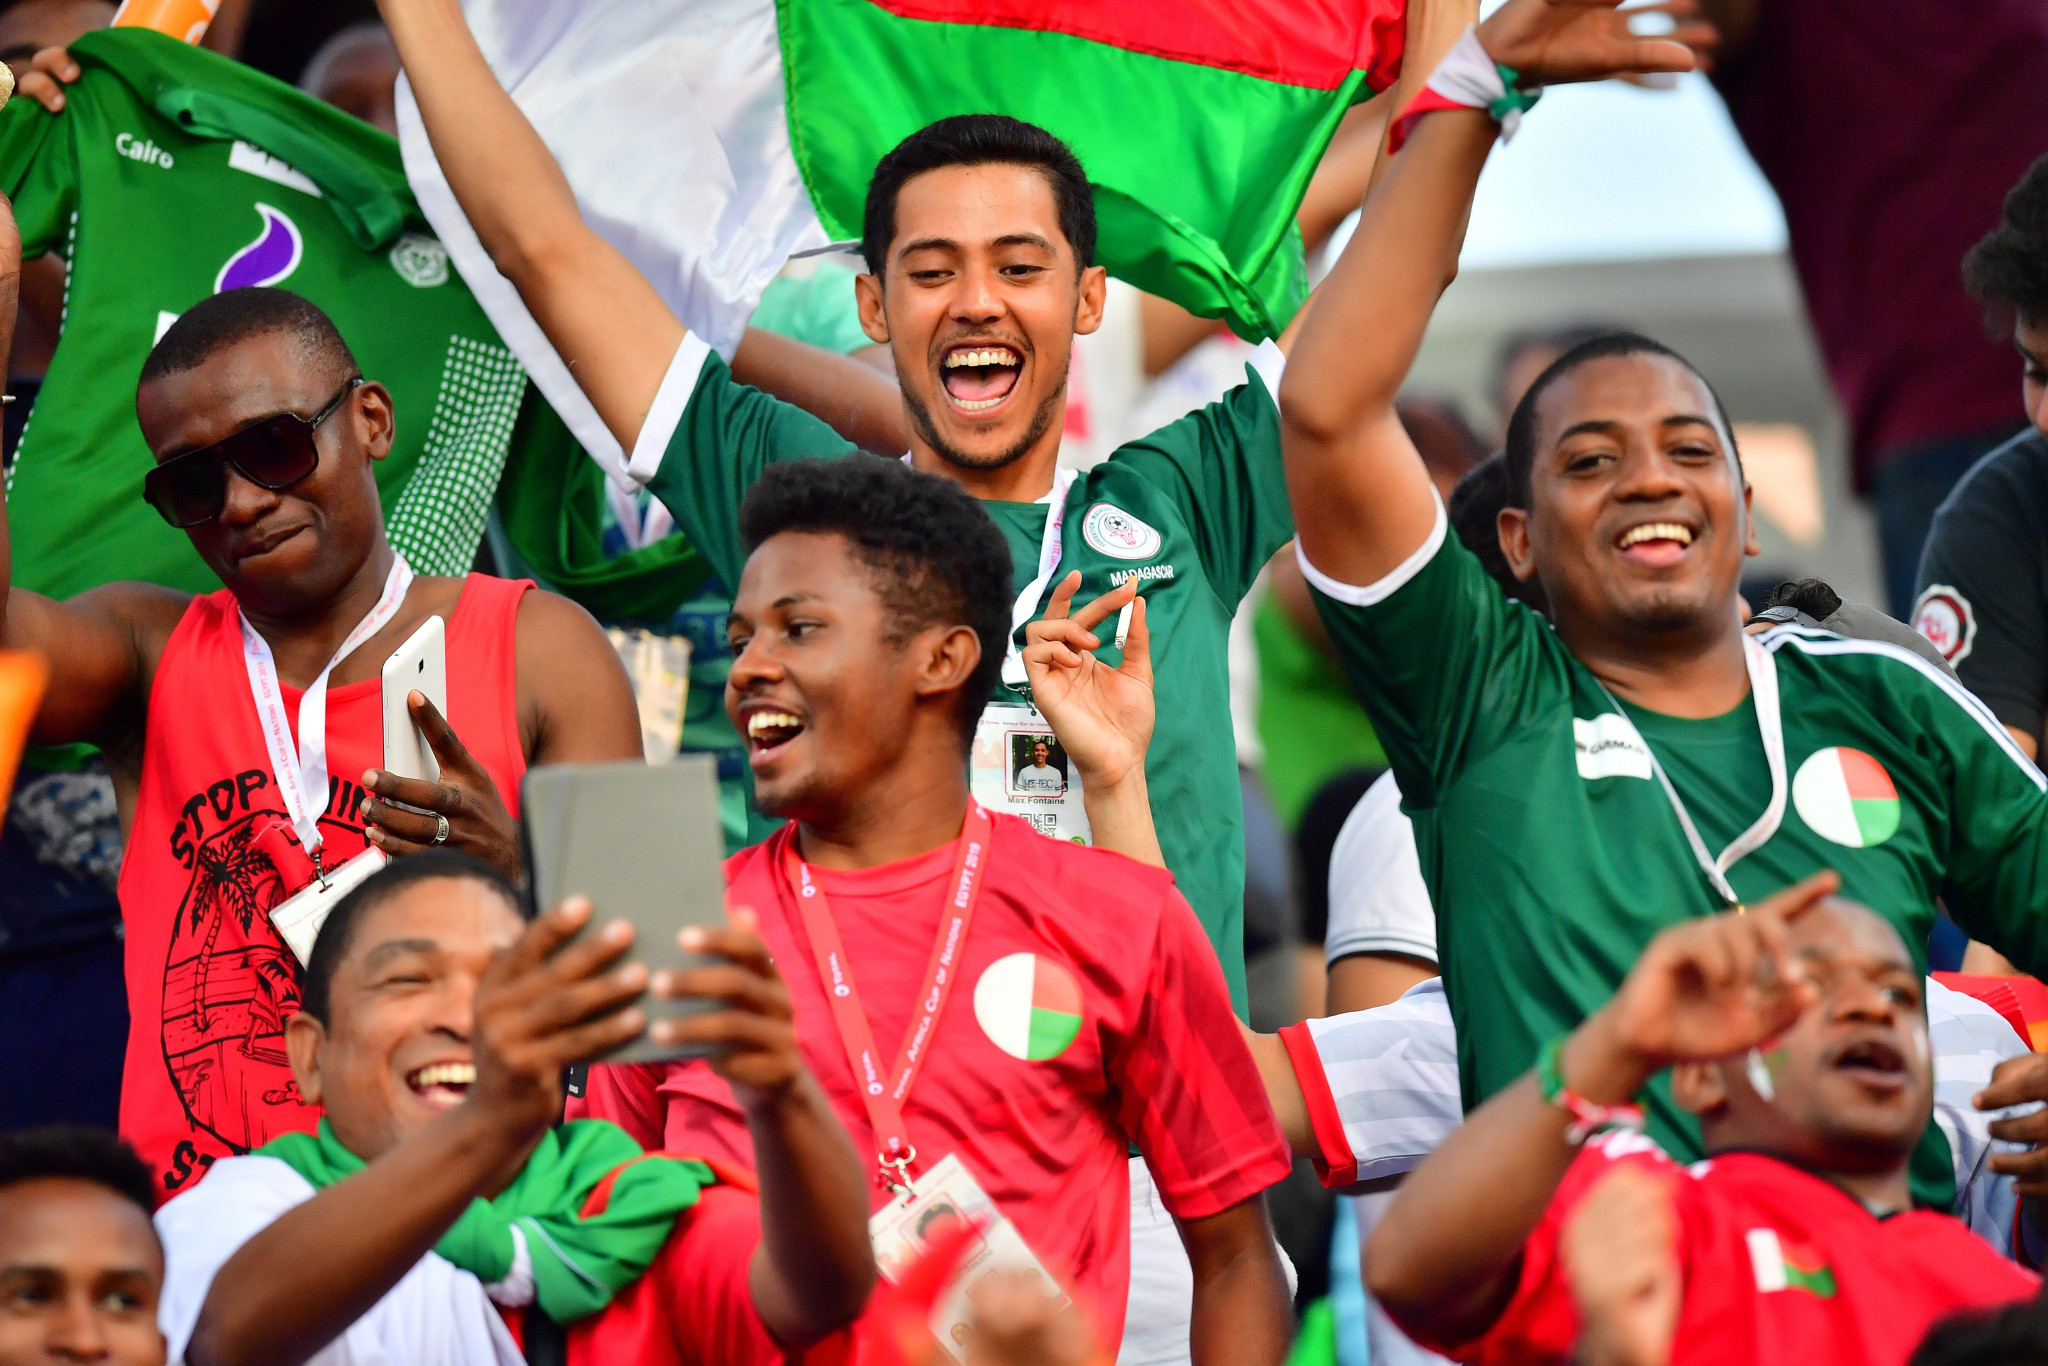 Madagascar's supporters had plenty to shout about during the victory over Nigeria at the Africa Cup of Nations ©Getty Images